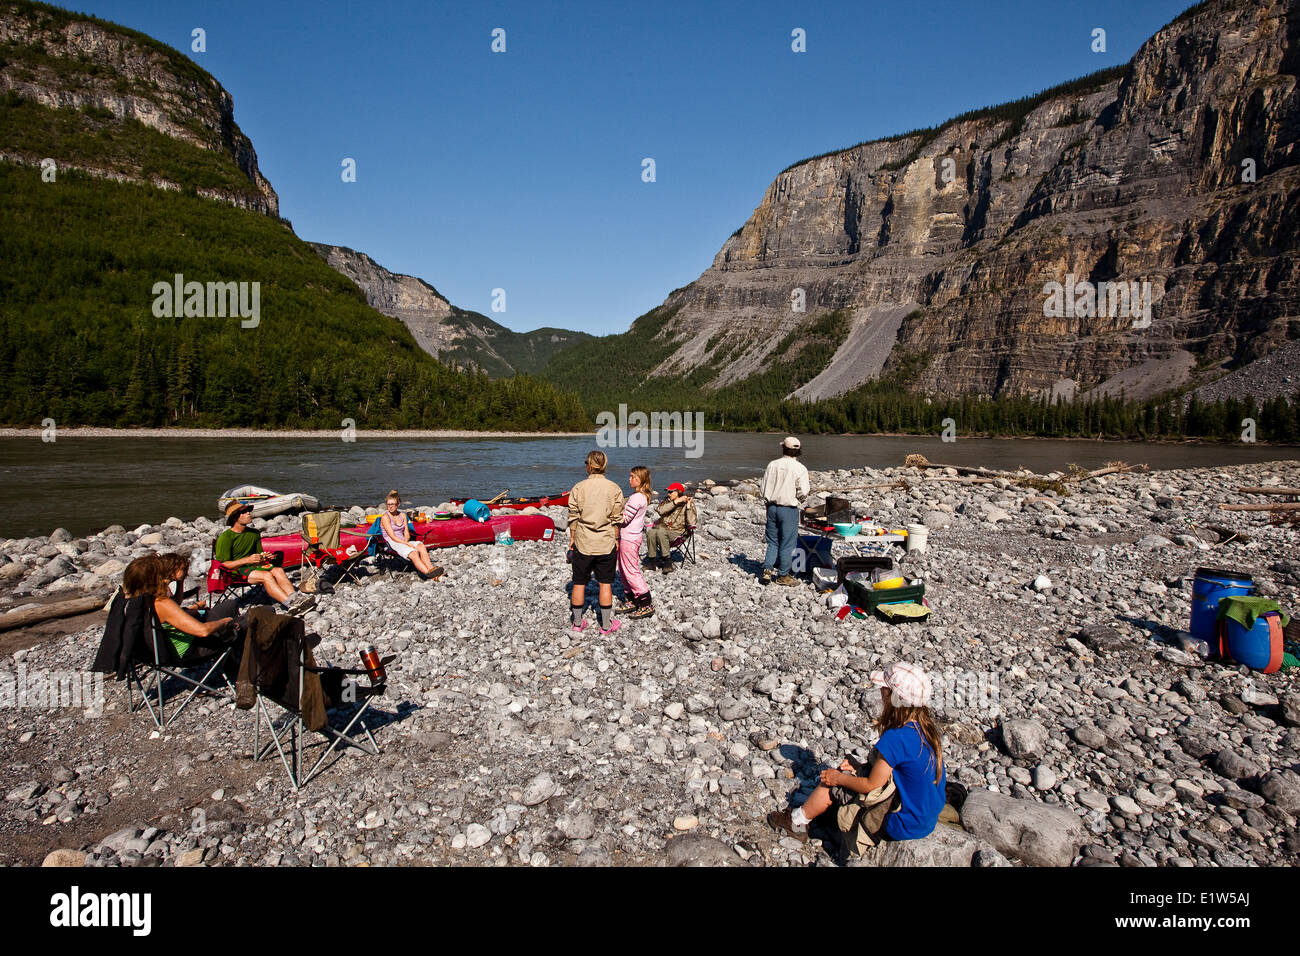 Group of people camped on Nahanni River, Nahanni National Park Preserve, NWT, Canada. Stock Photo